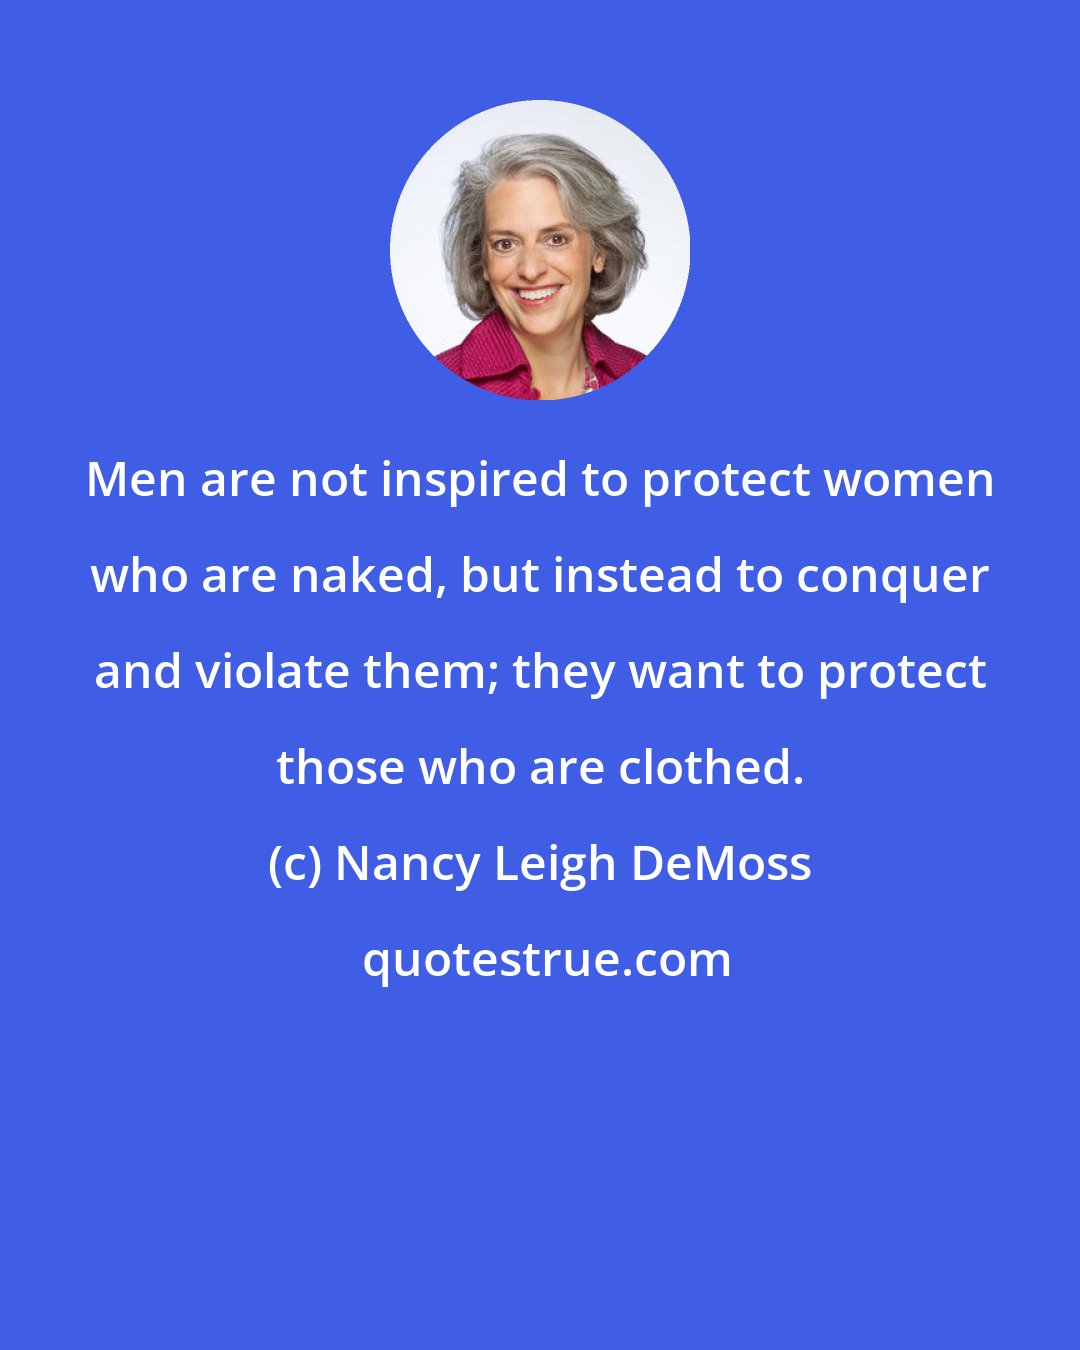 Nancy Leigh DeMoss: Men are not inspired to protect women who are naked, but instead to conquer and violate them; they want to protect those who are clothed.